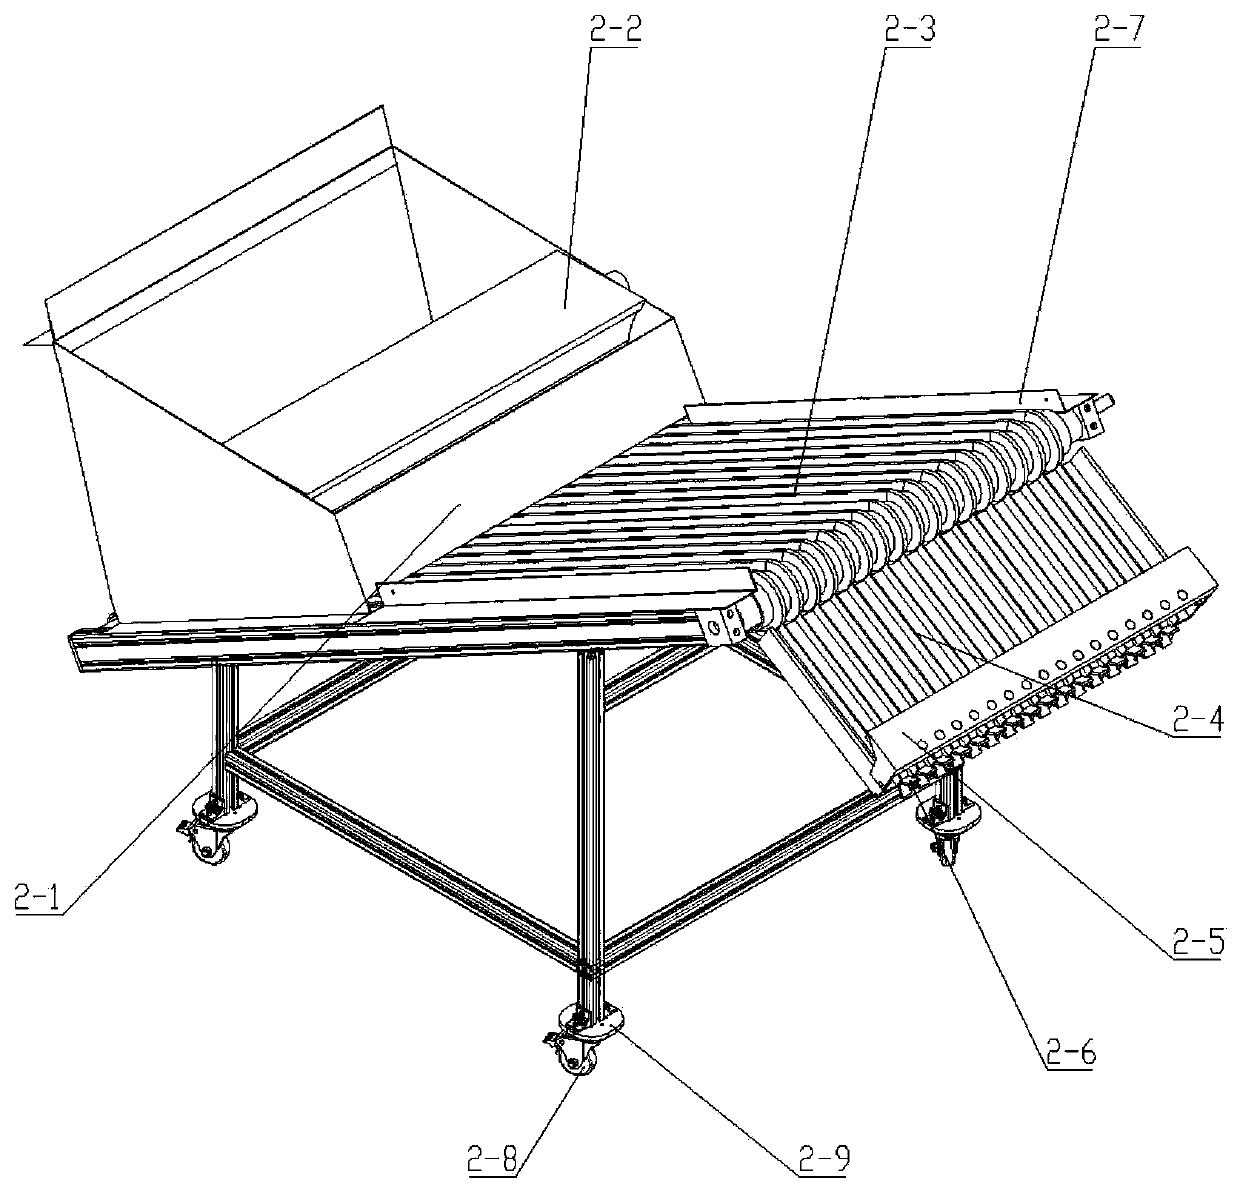 Fruit excellent selection device with material distributing box structure